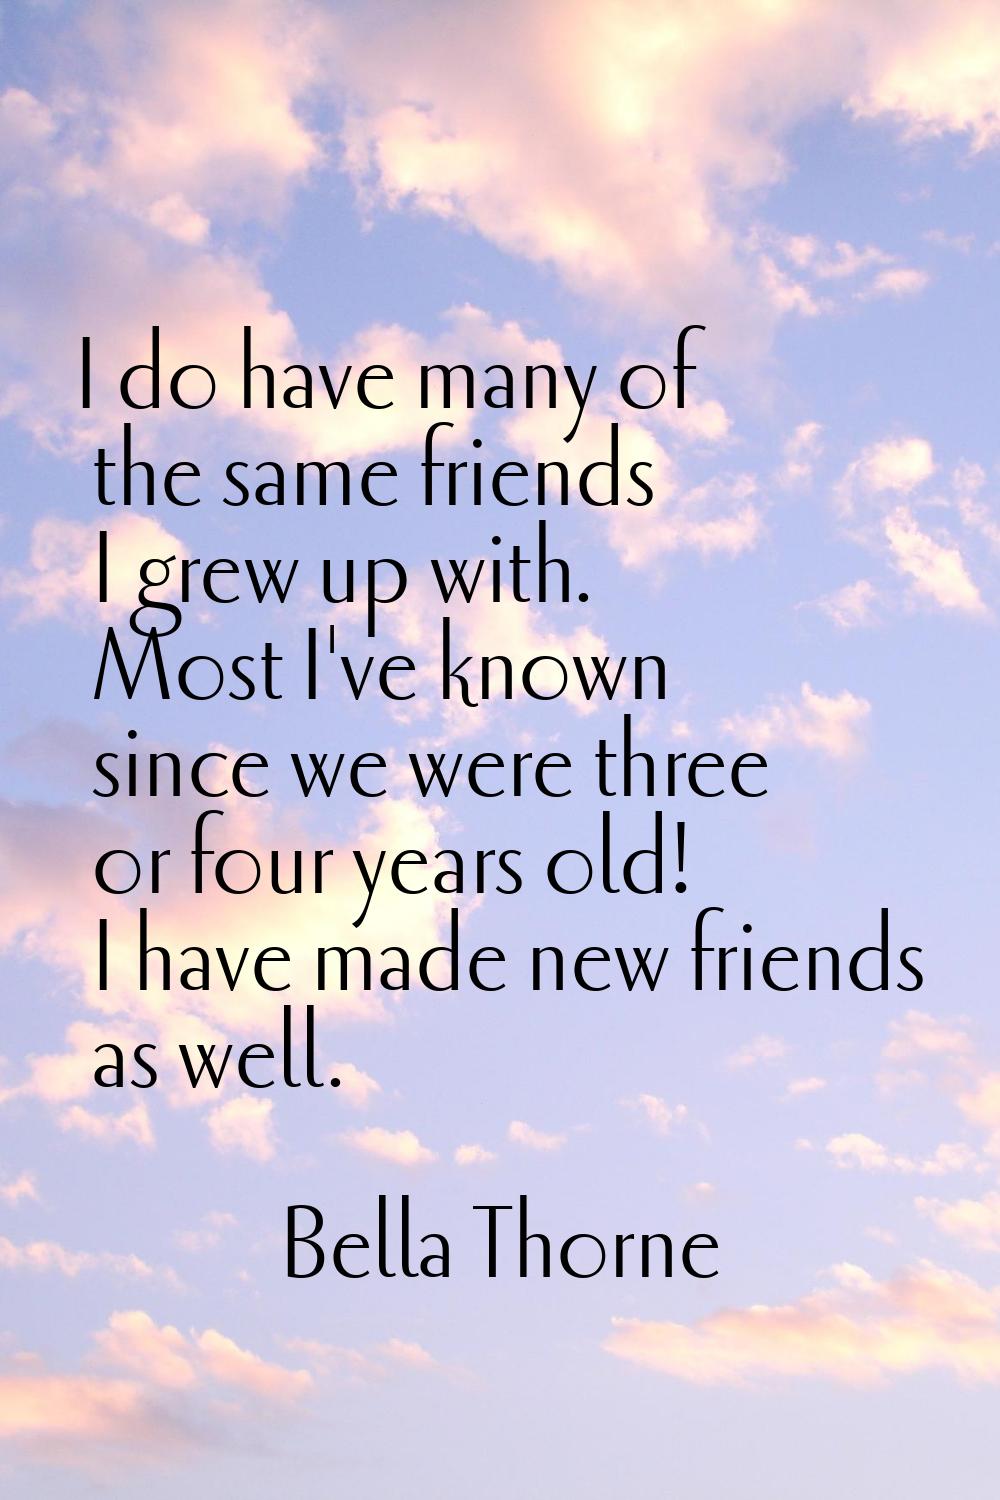 I do have many of the same friends I grew up with. Most I've known since we were three or four year